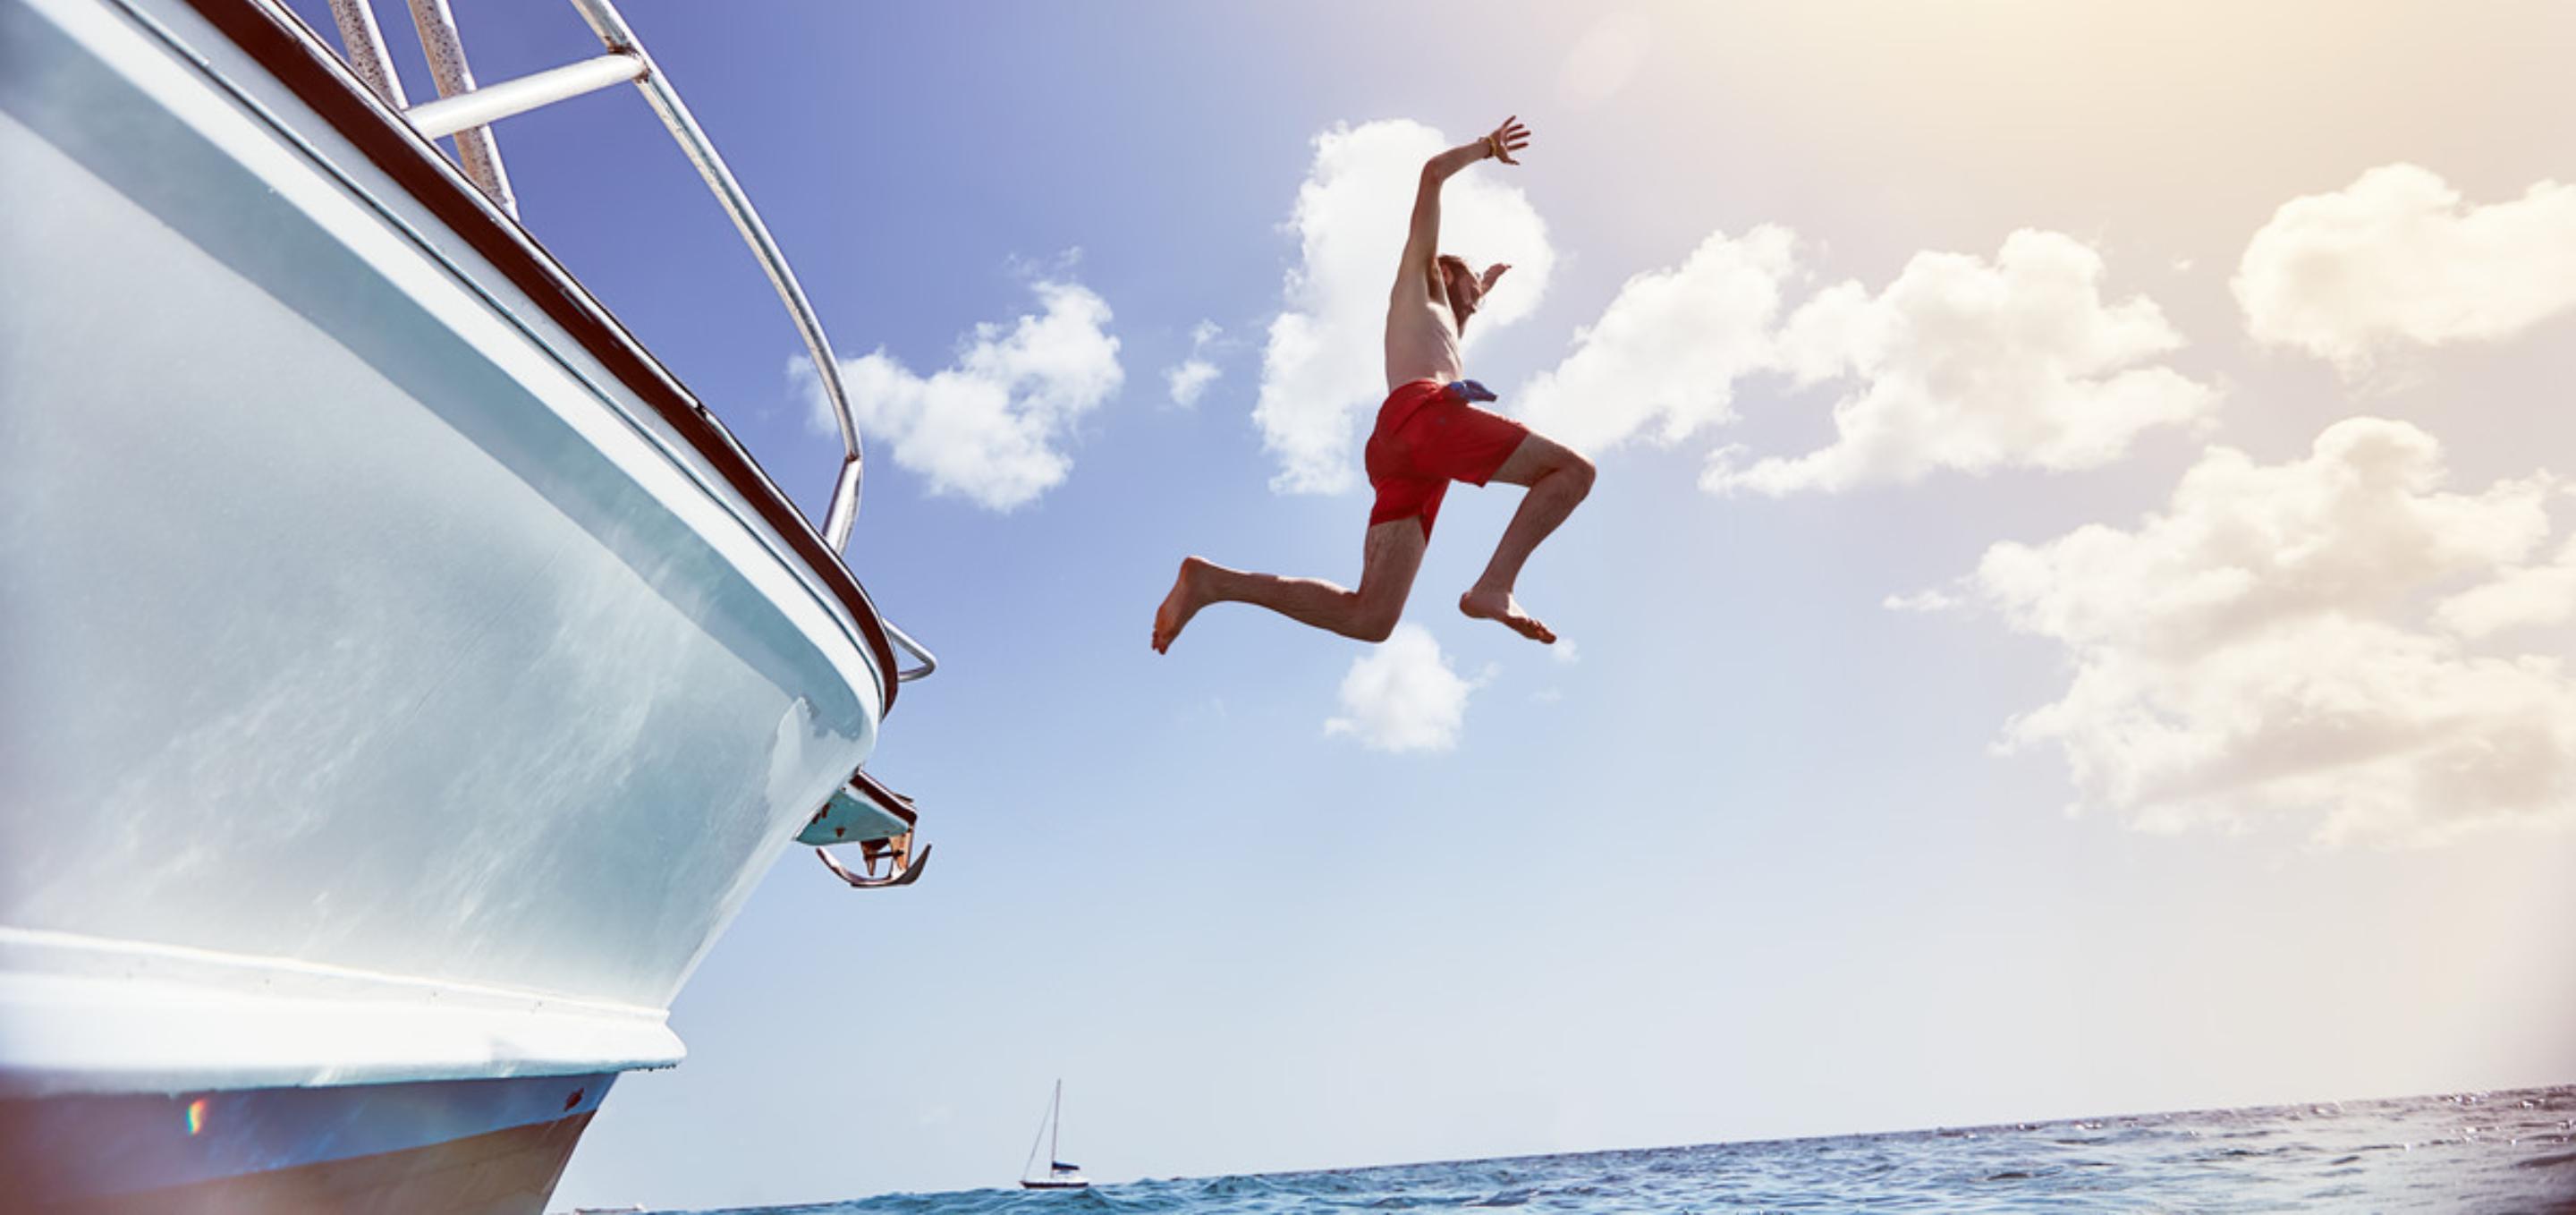 An image of a man jumping off a boat